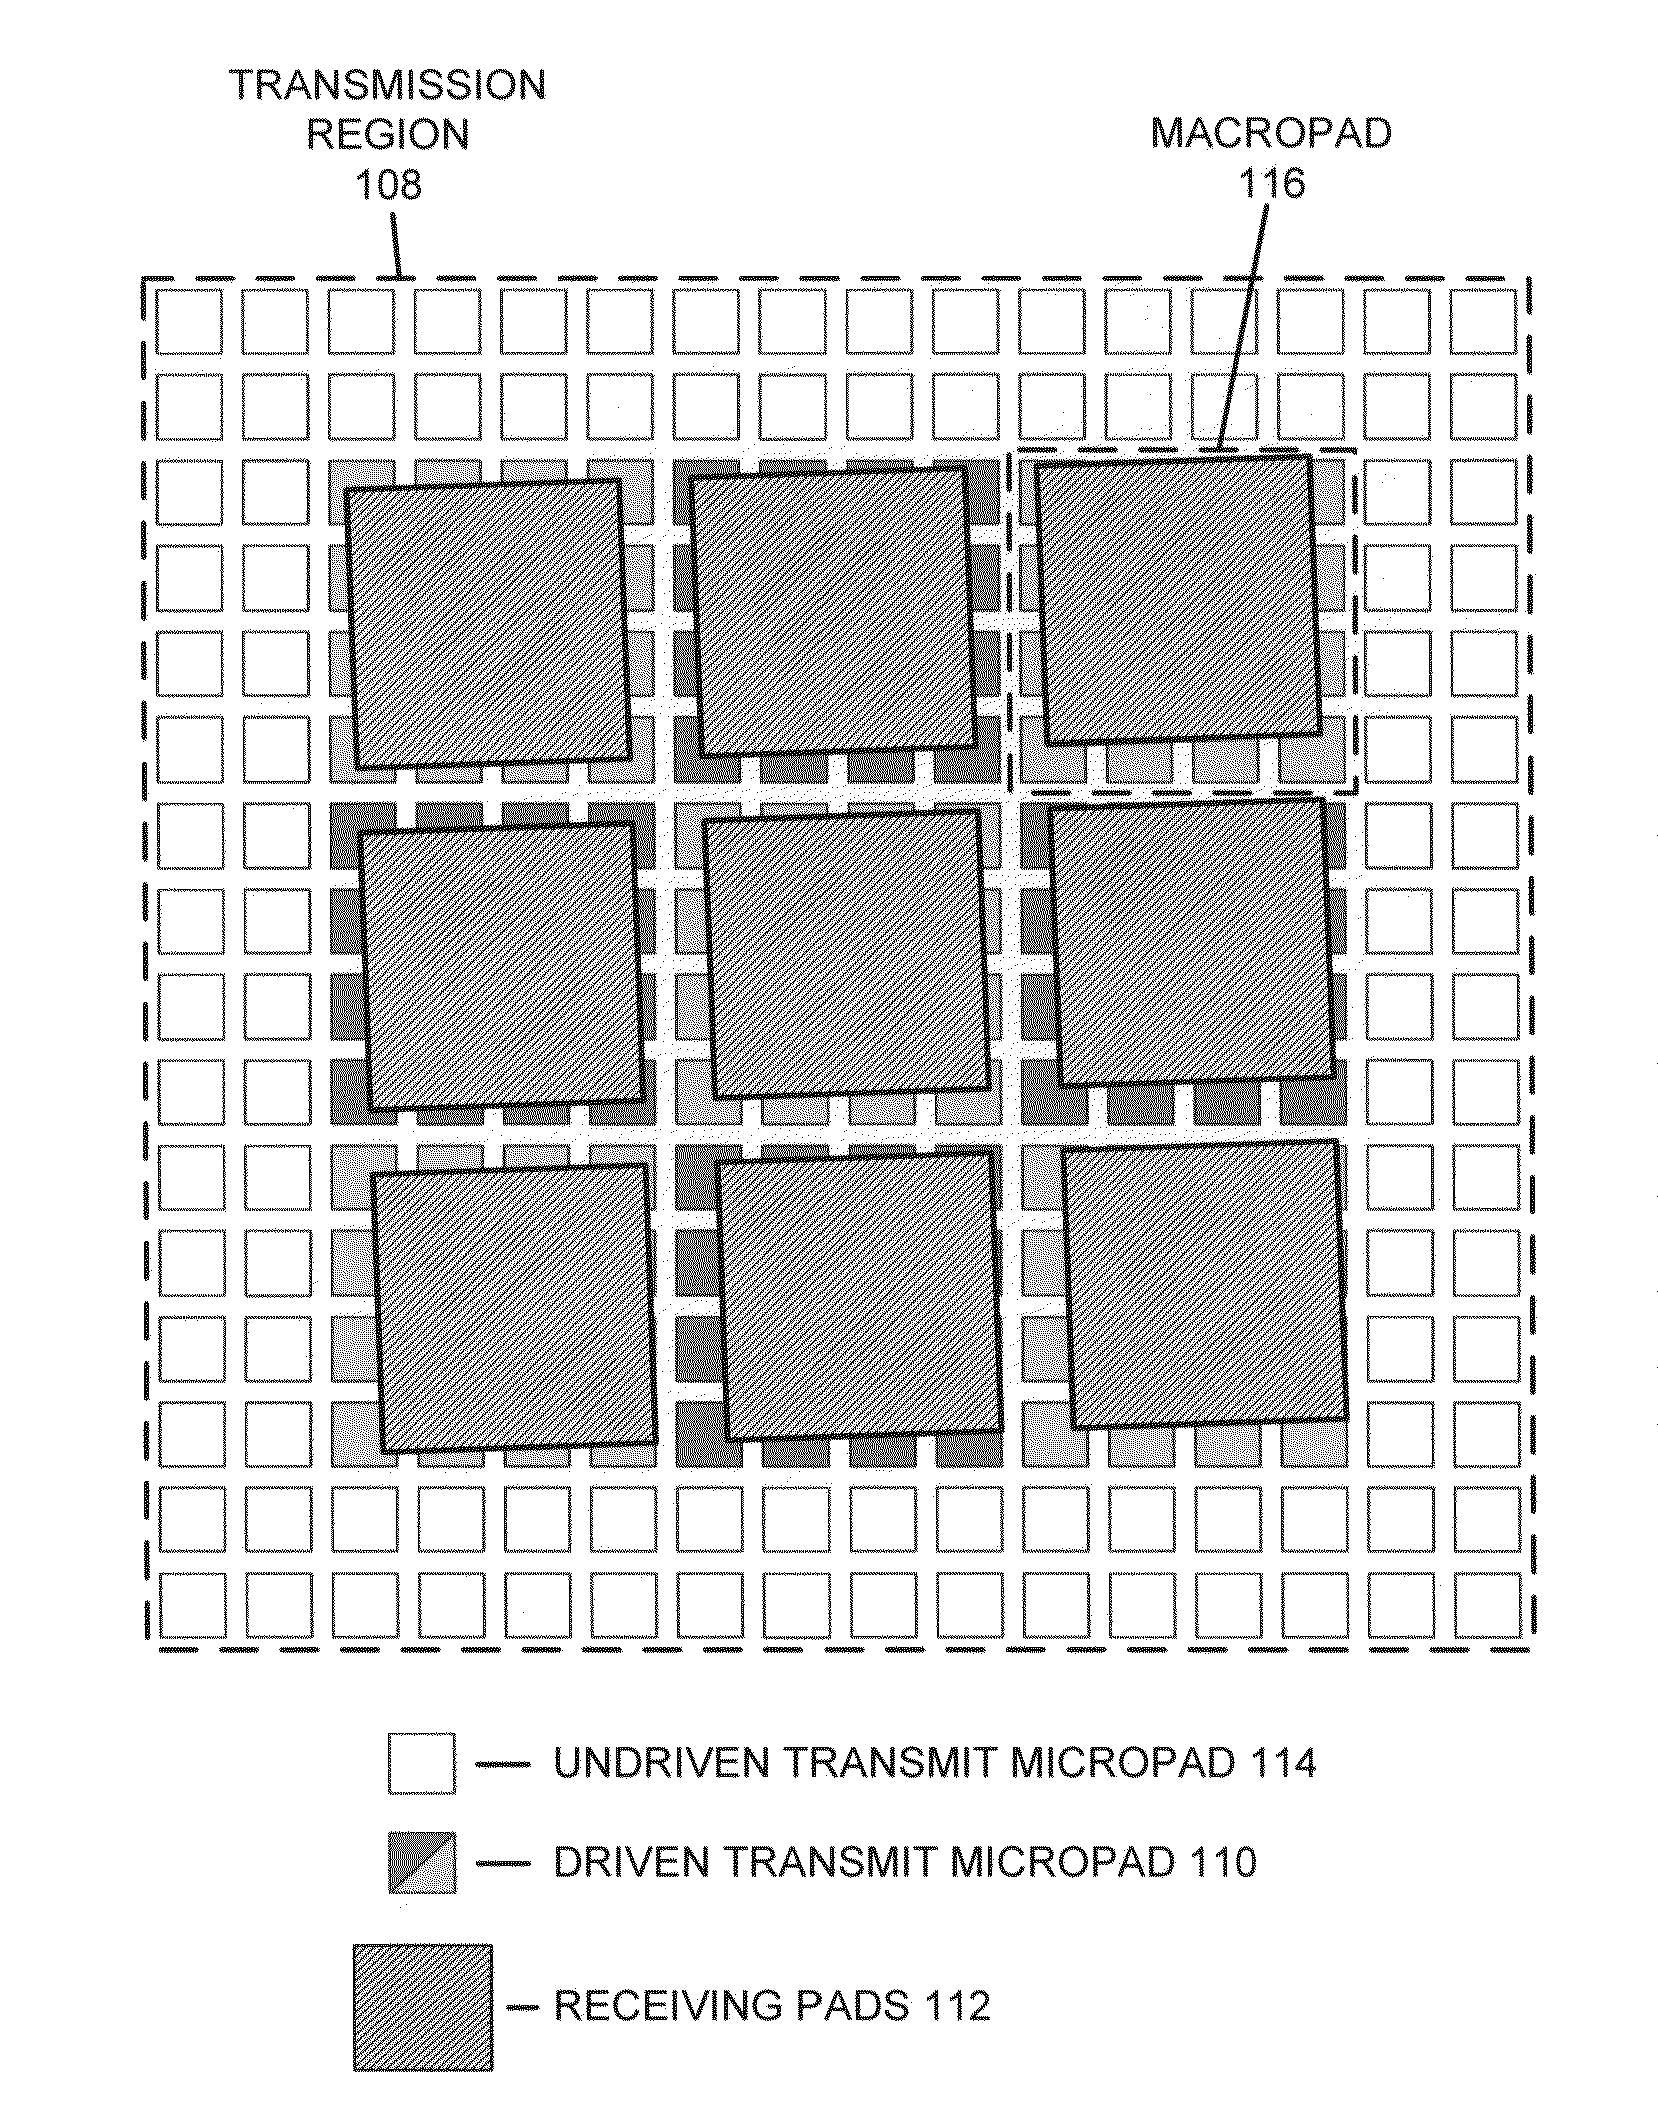 Steering fabric that facilitates reducing power use for proximity communication